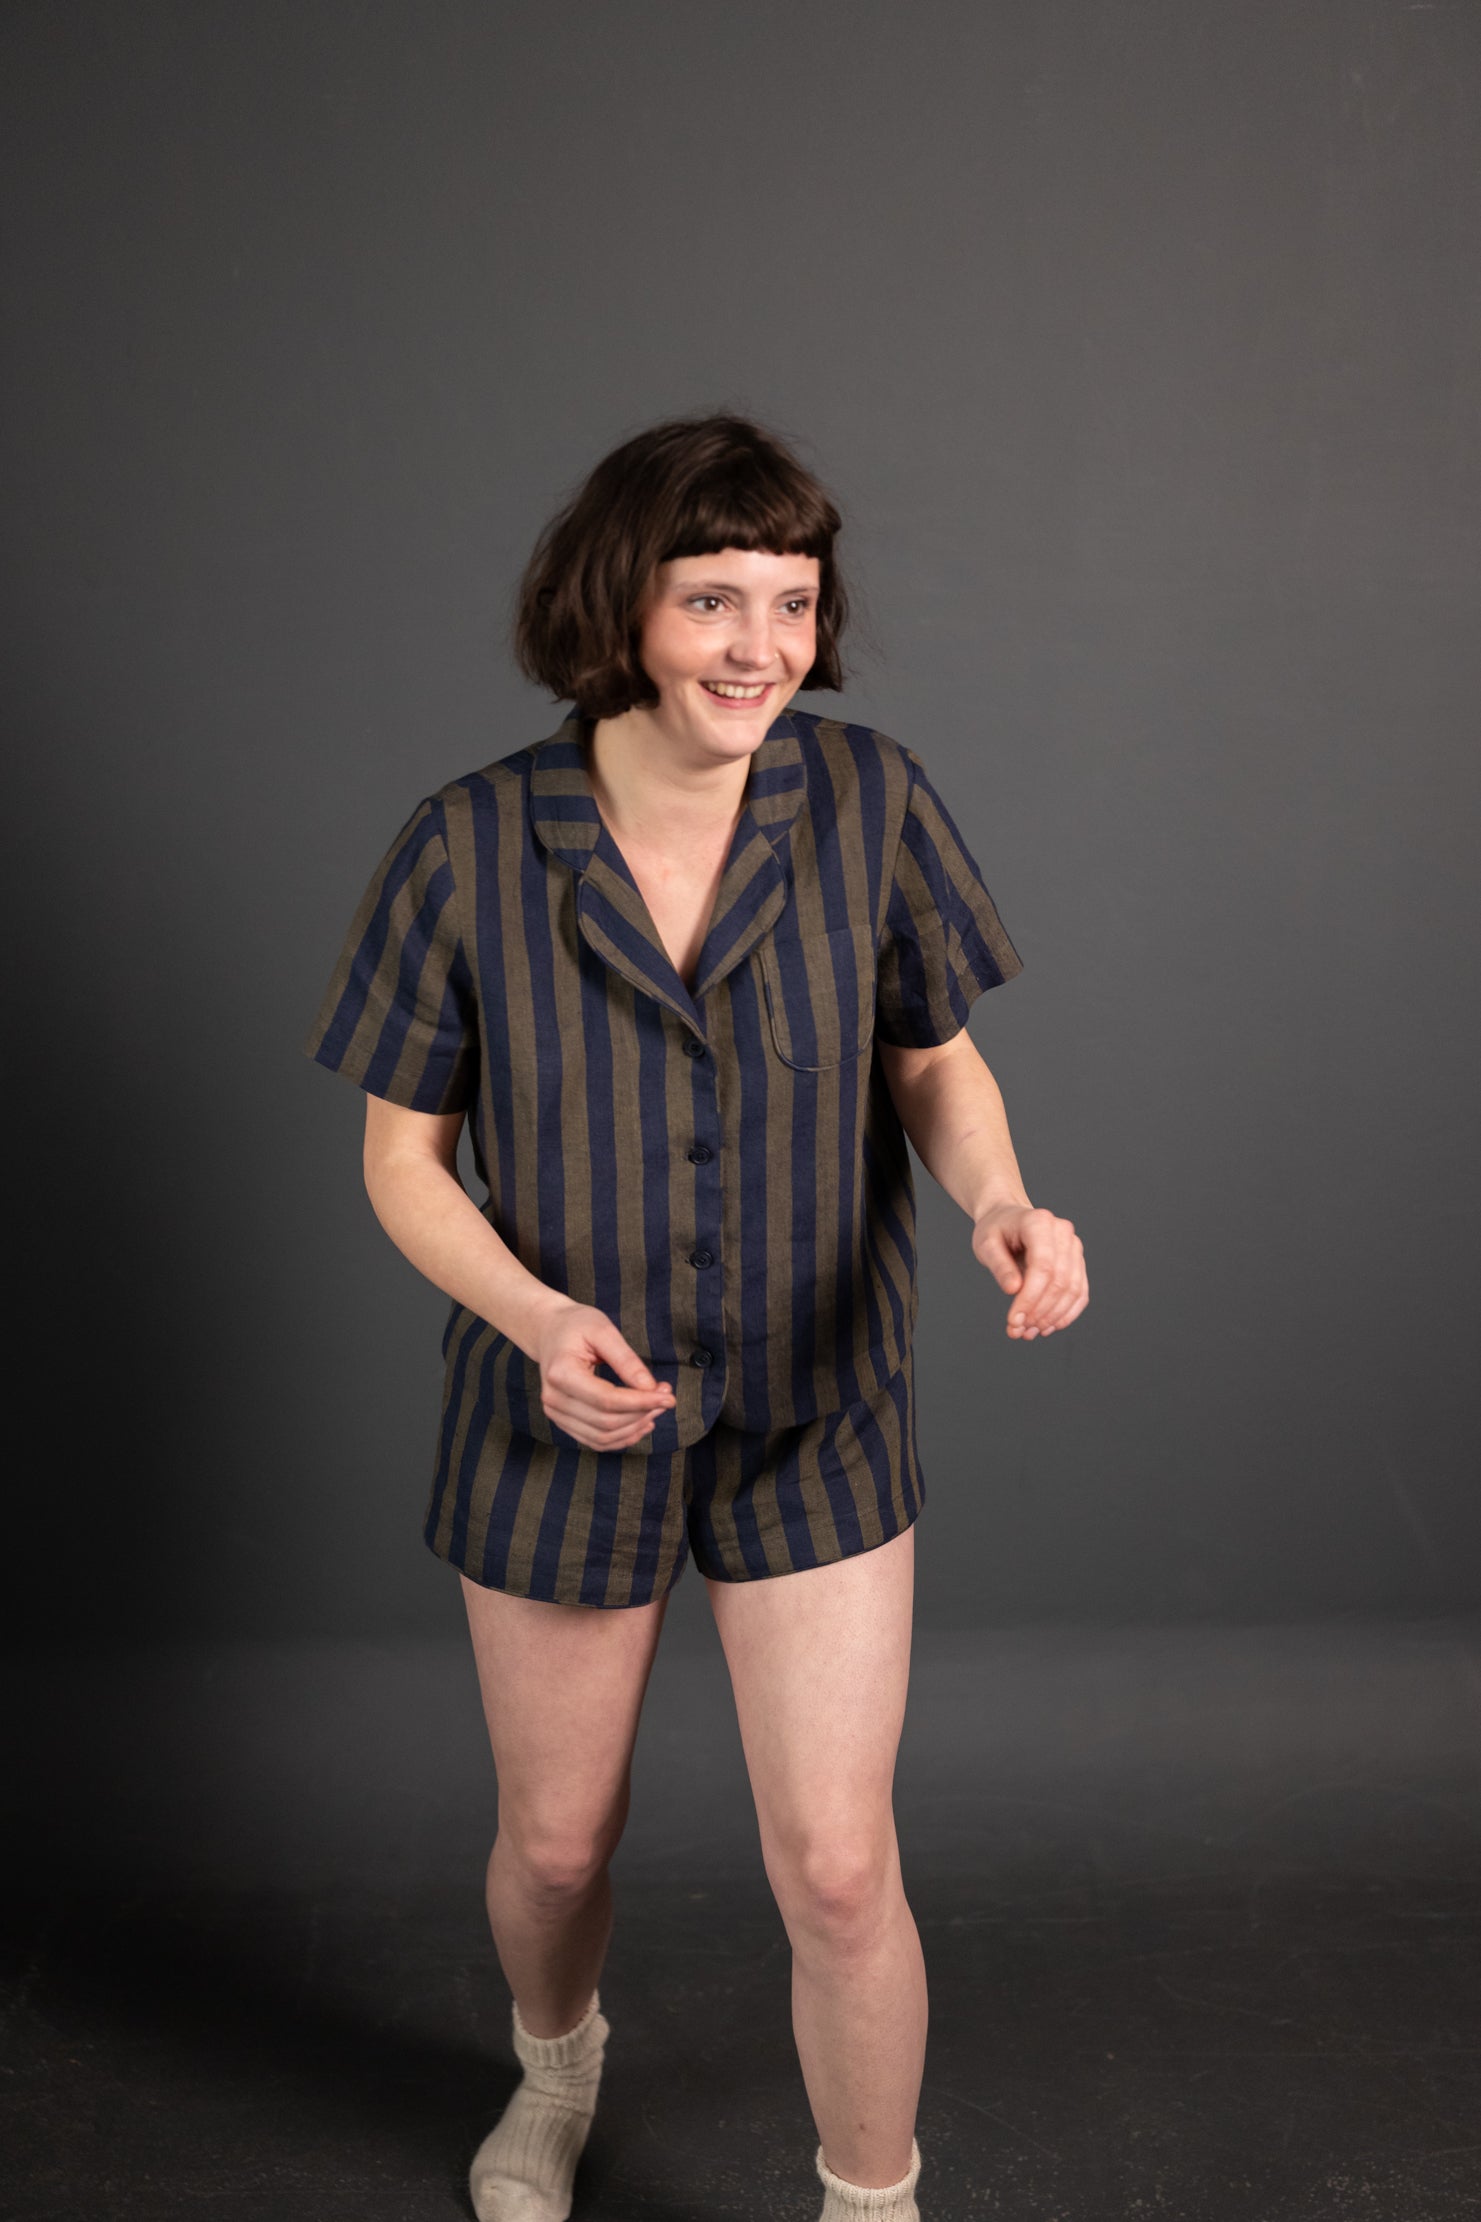 portrait image, merchant and mills Winnie pyjama pattern, woman stood, one foot unfront of the other, smiling, looking off camera, modelling short sleeve shirt, shorts, fabric is a navy and brown wide stripe, background is black.